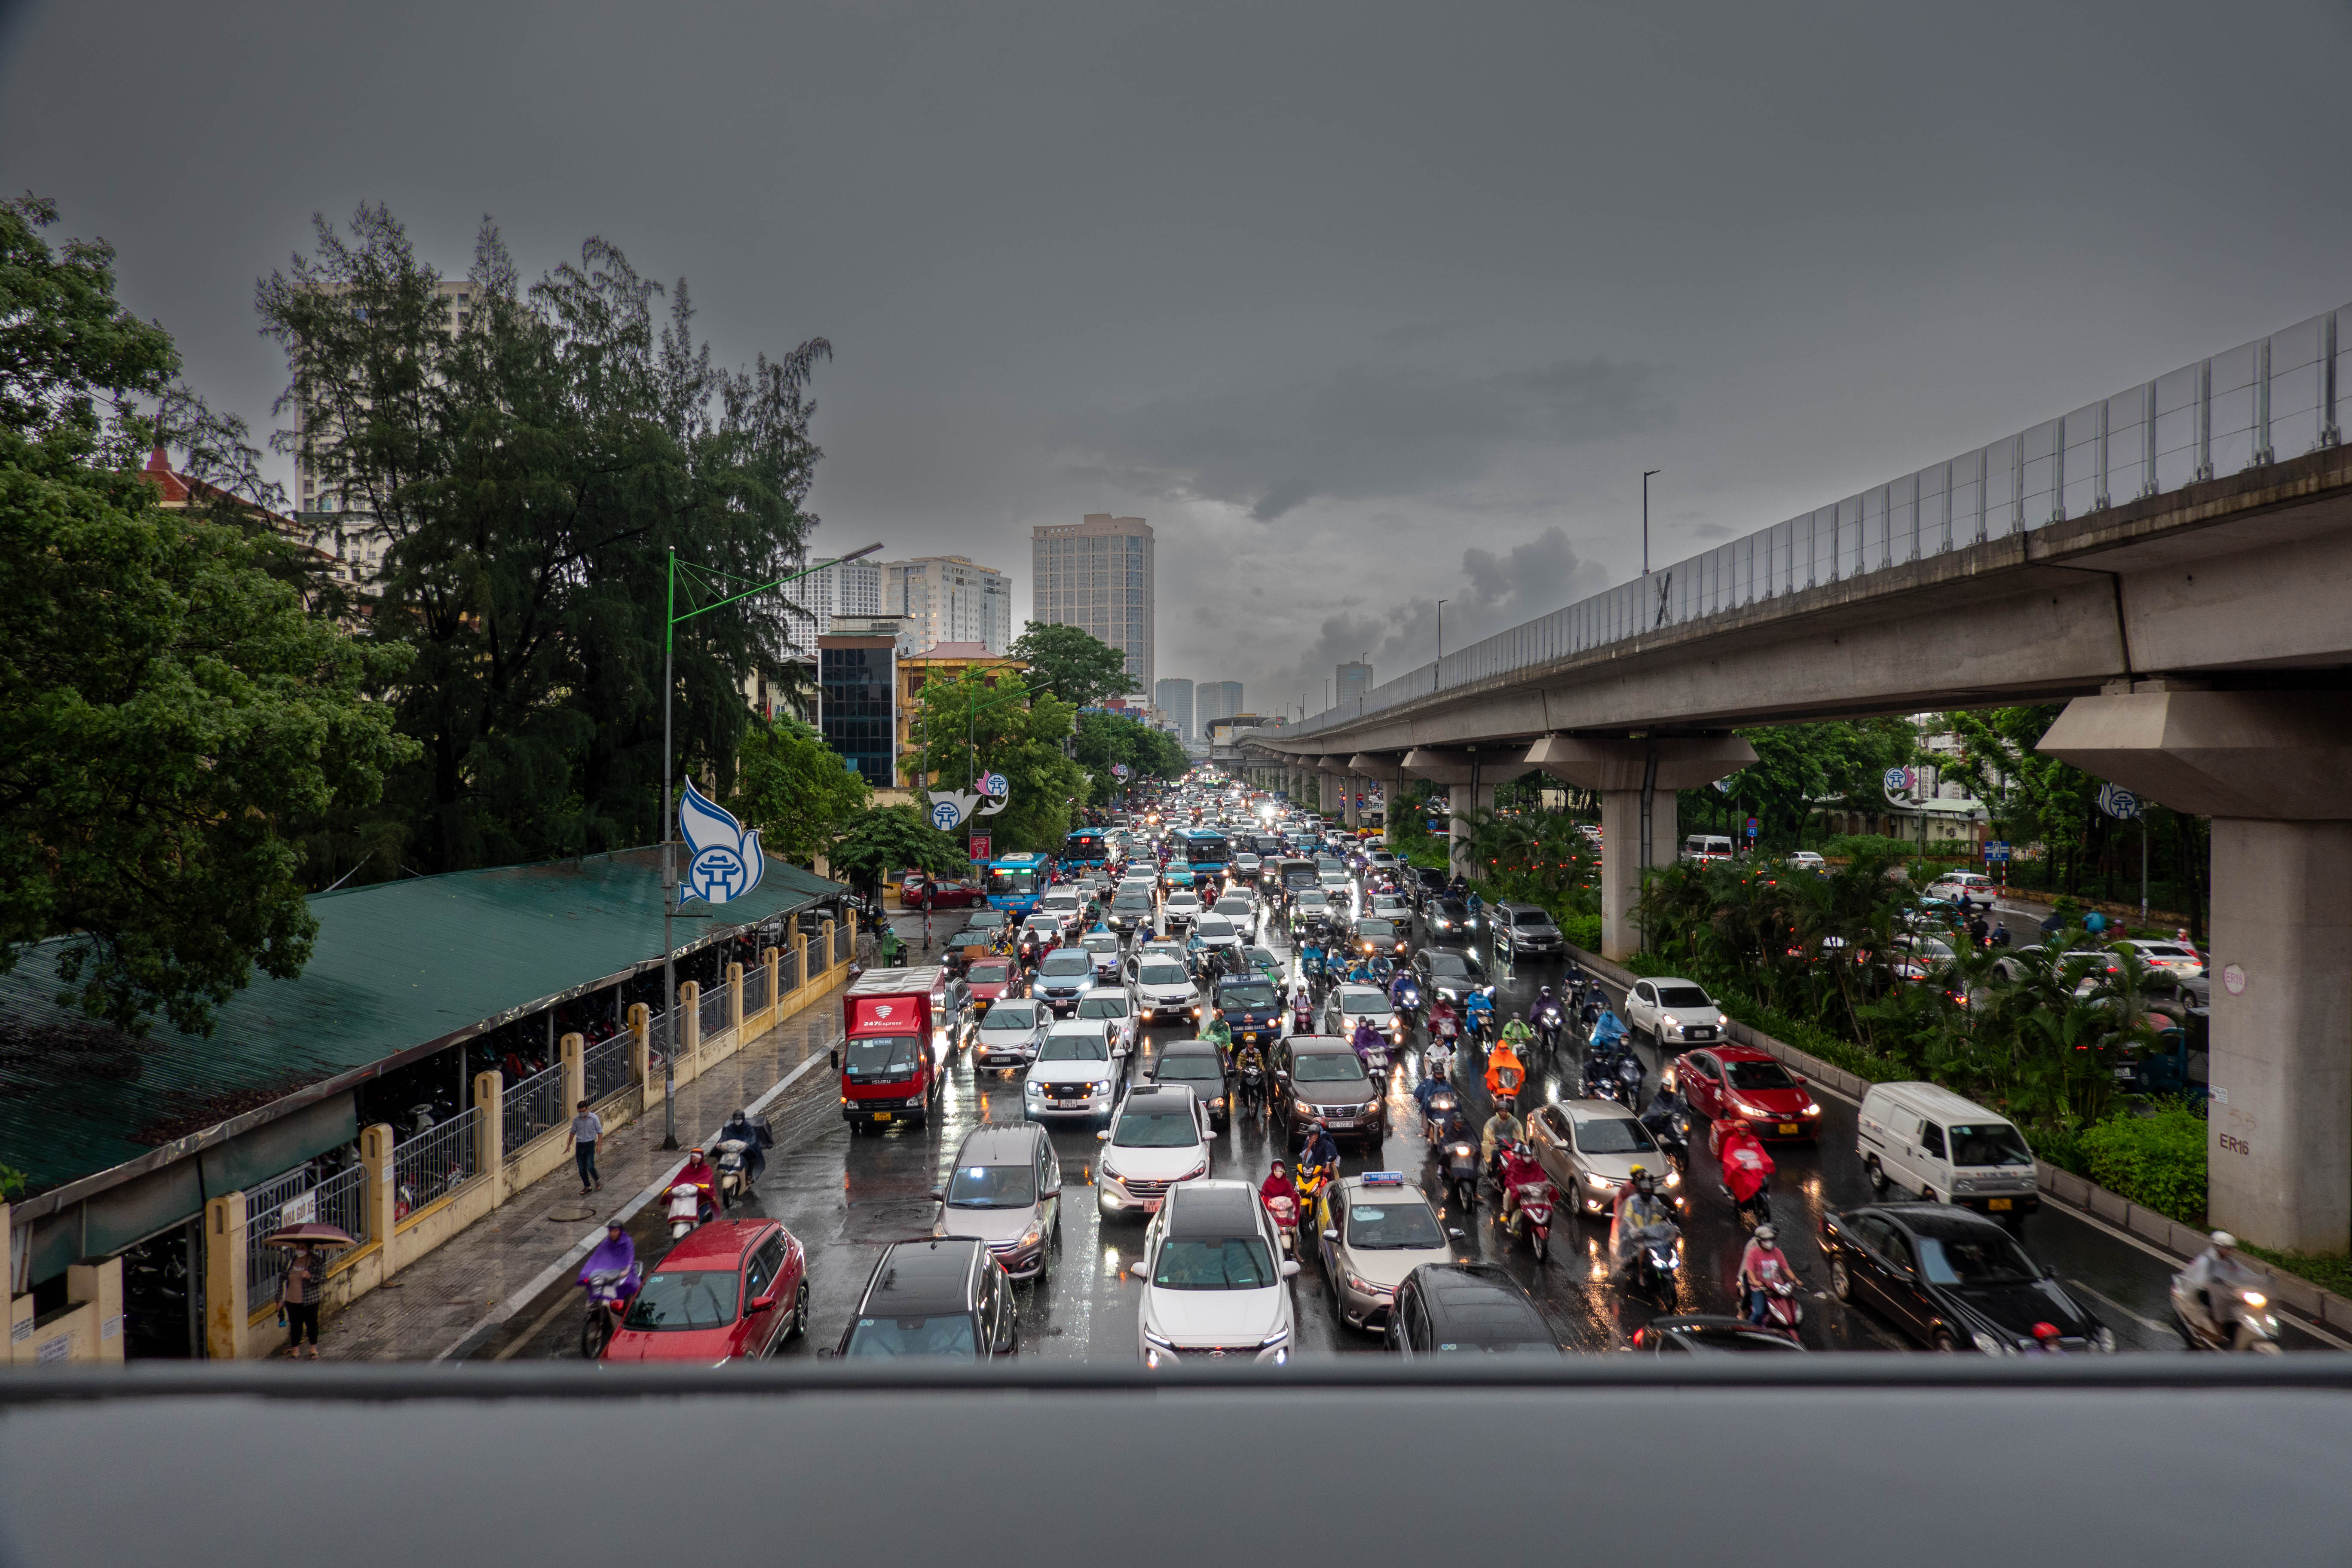 Picture of a traffic jam on a street with a dark sky